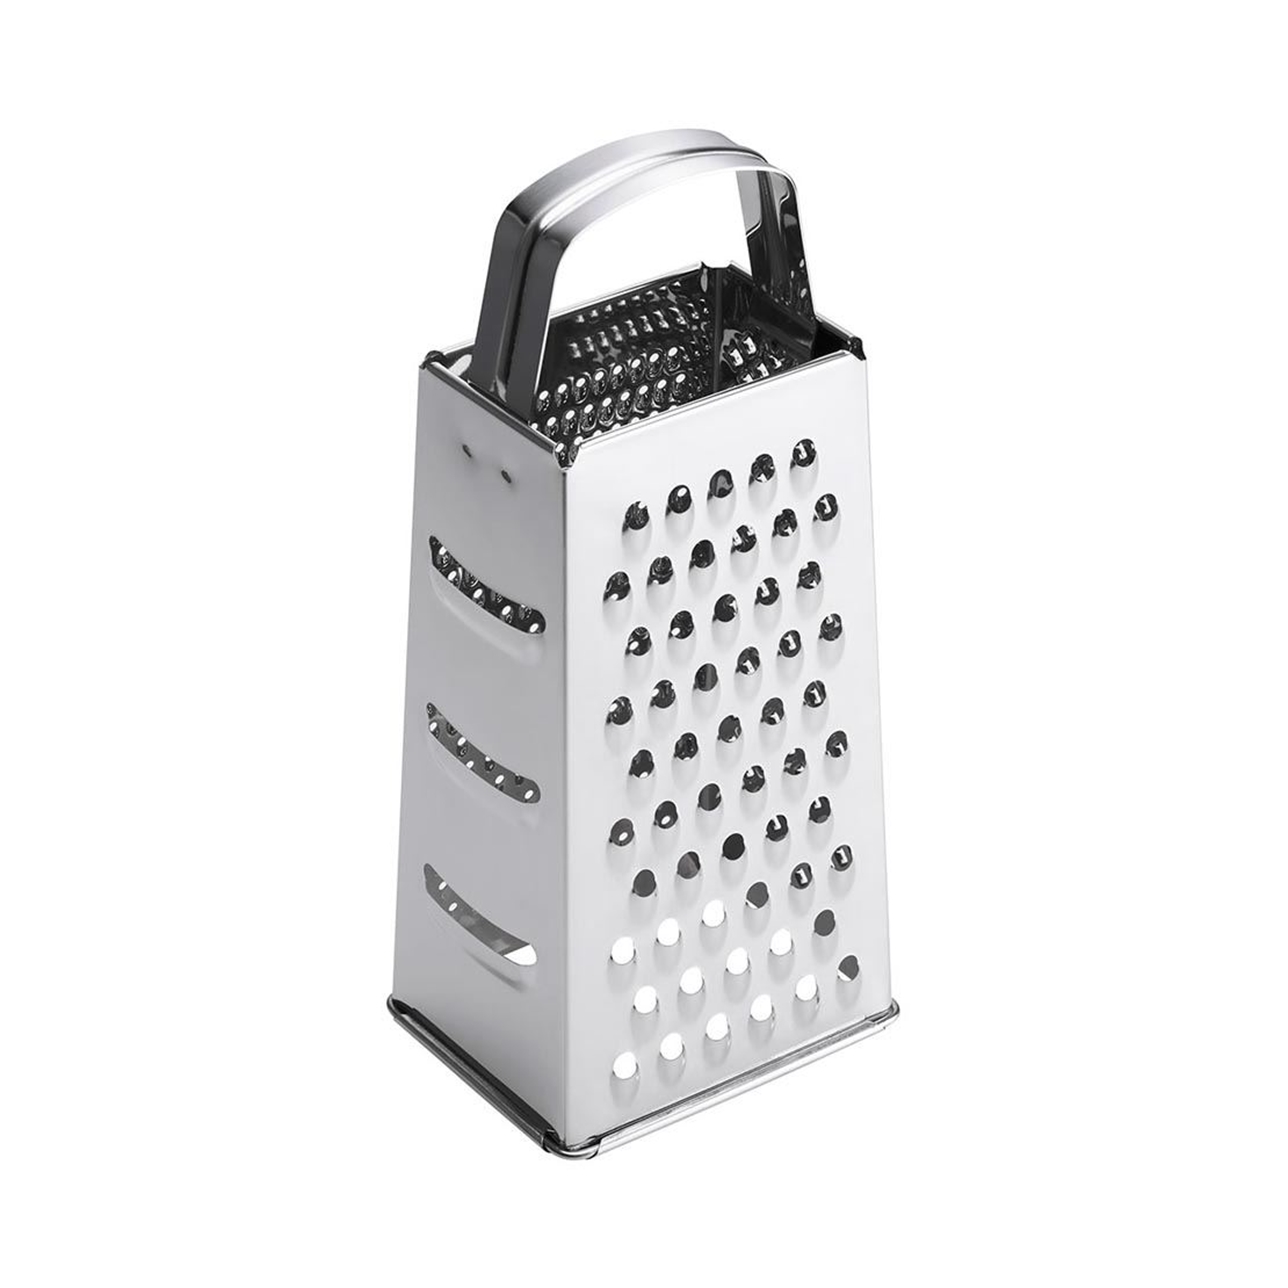 Stainless Steel Cheese Grater - Quality Kitchenwares Online